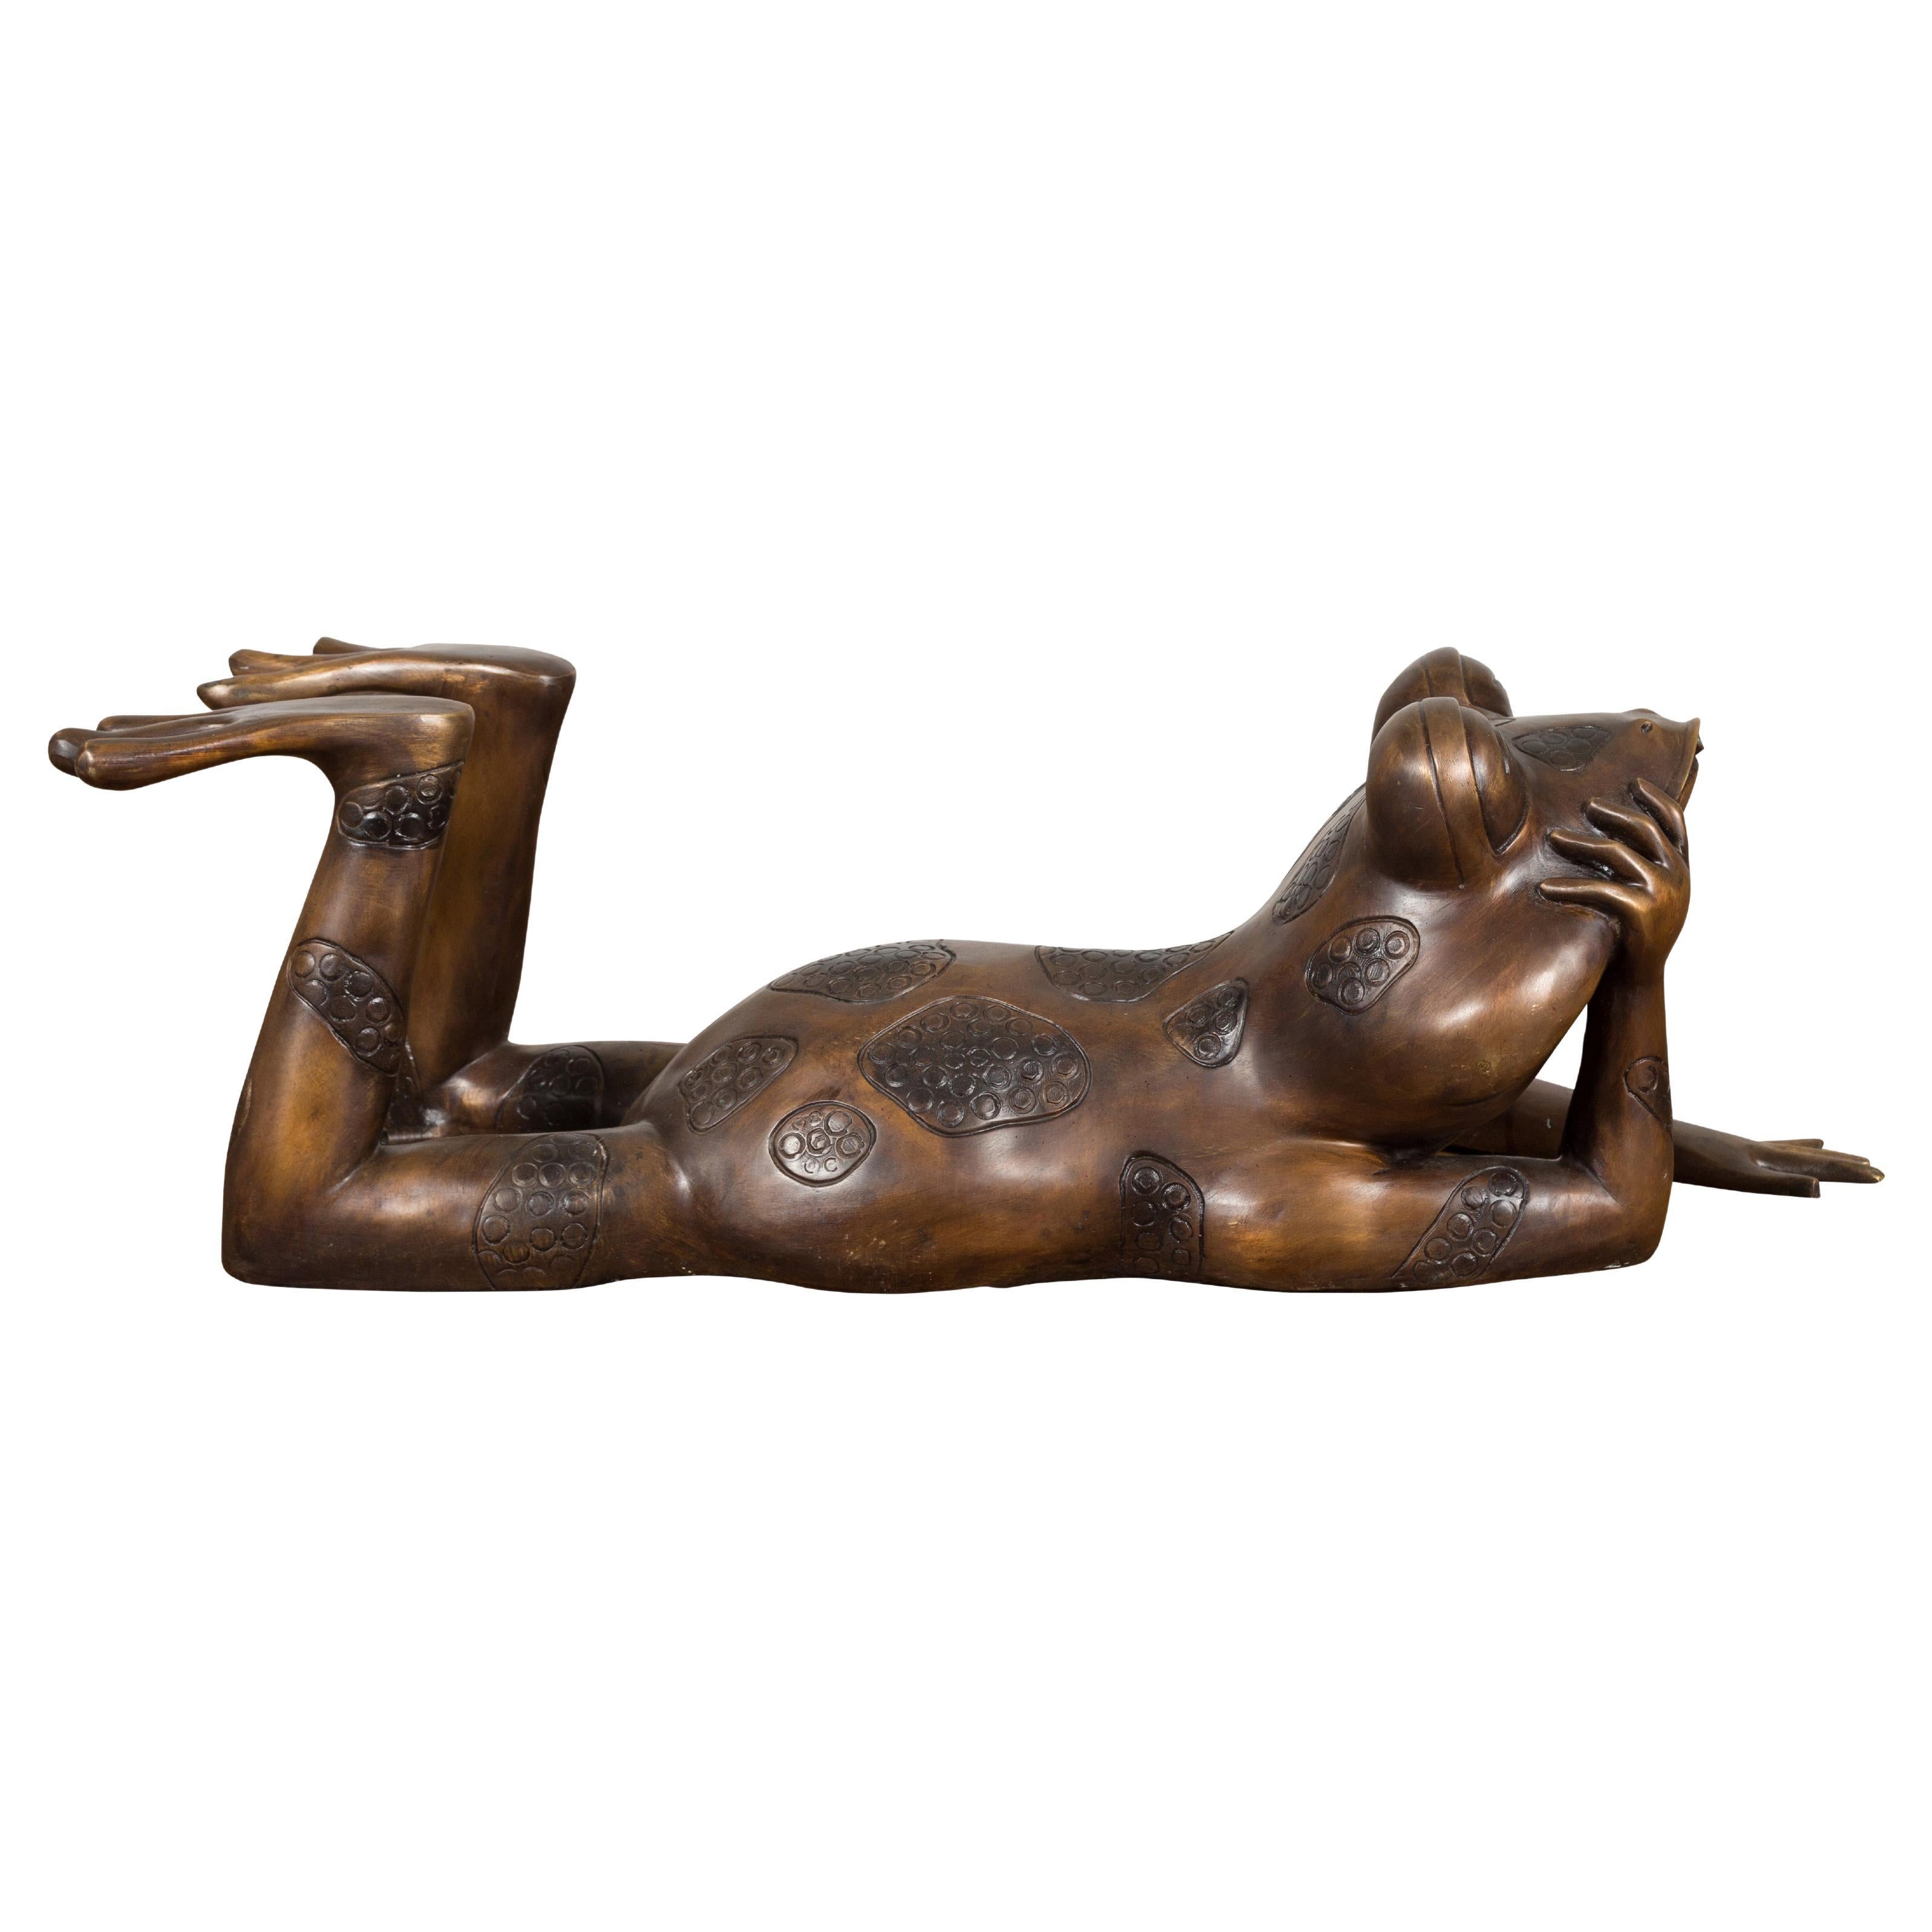 Daydreaming Frog Bronze Sculpture with Golden Patina, Tubed as a Fountain